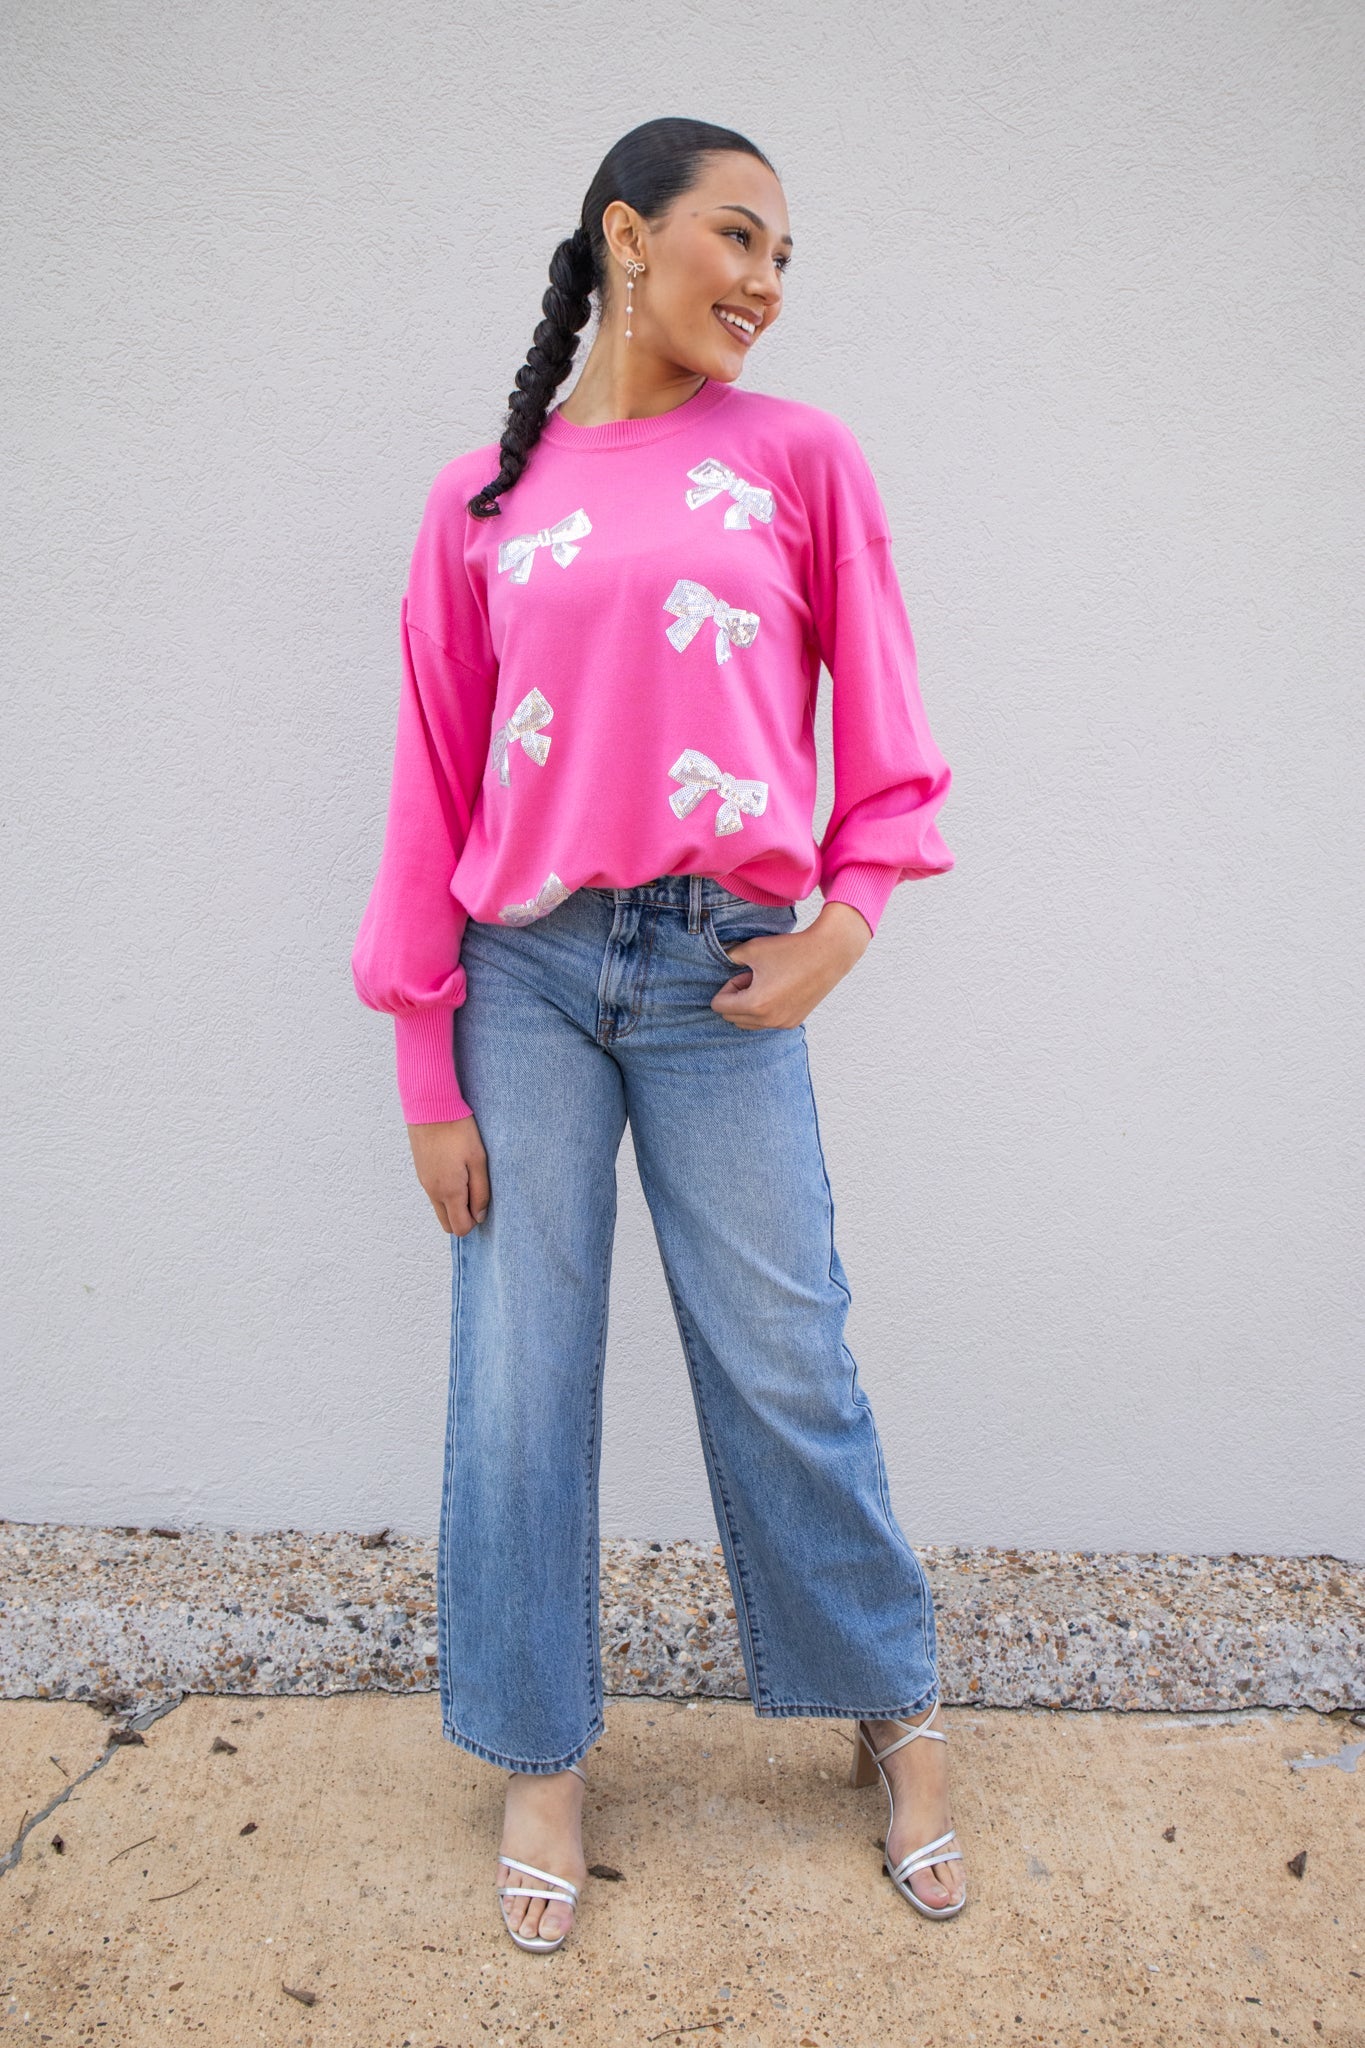 flared jeans outfit ideas — bows & sequins